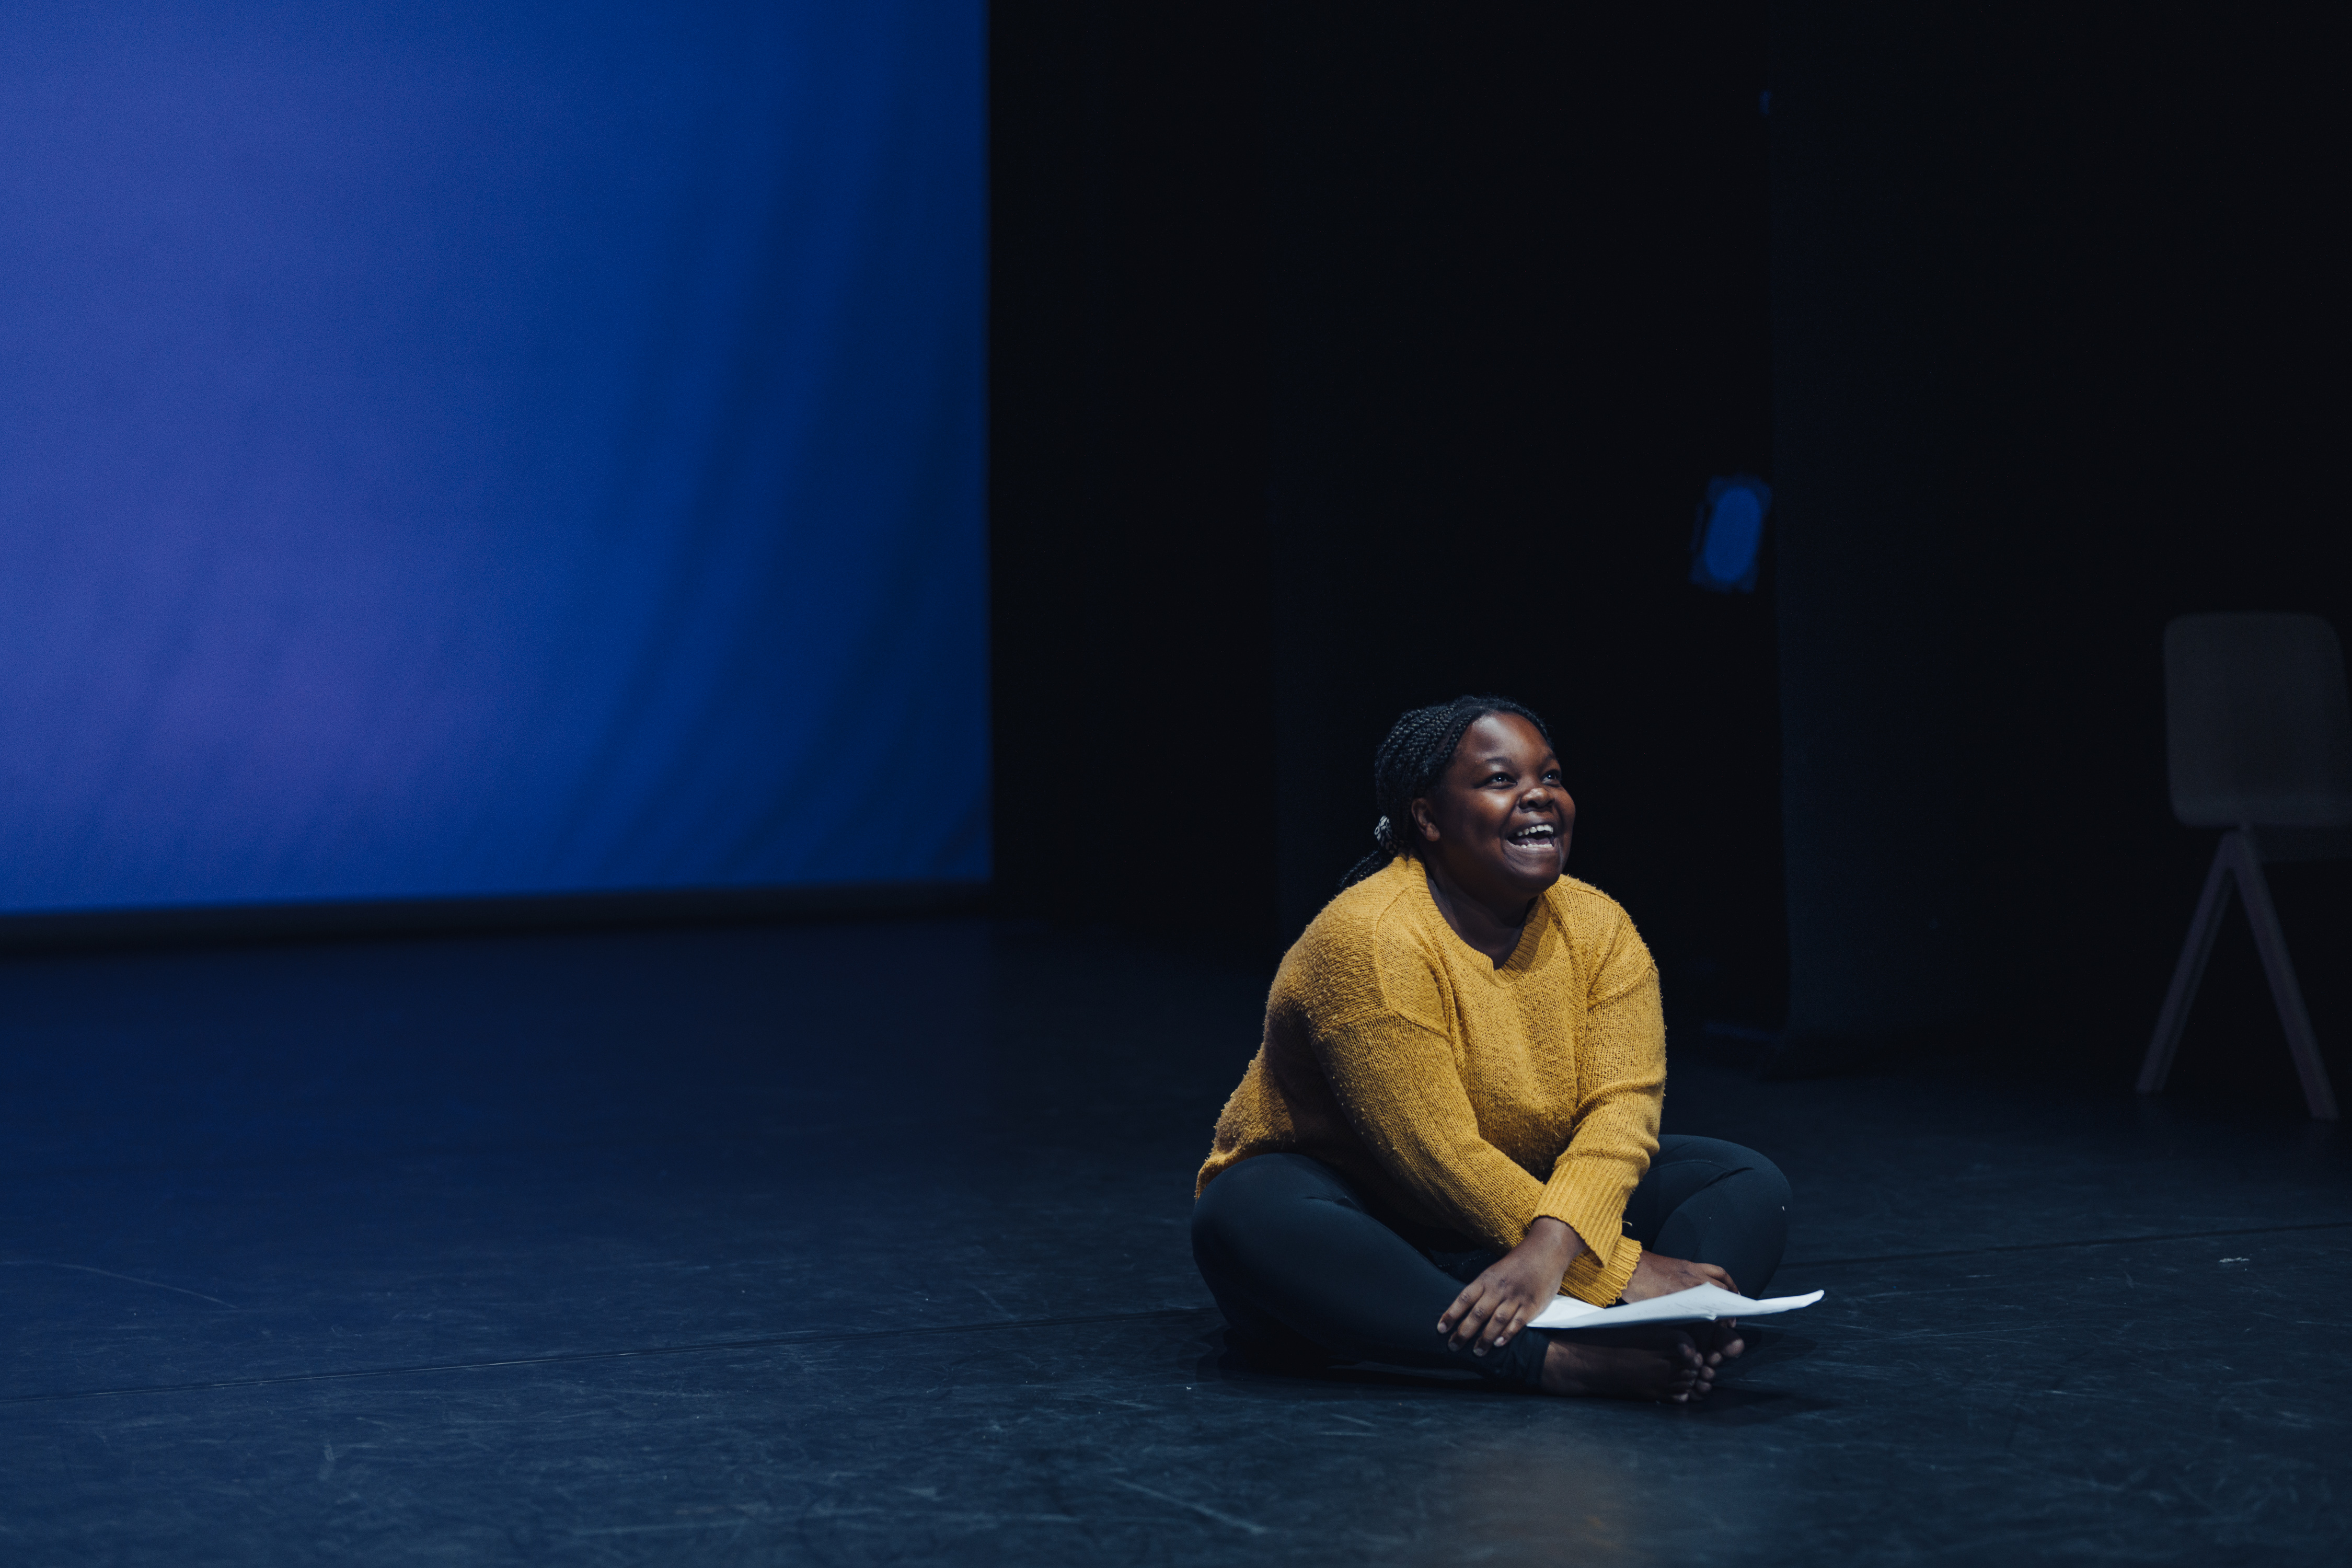 Corinne, a black woman wearing a yellow jumper, is sitting cross-legged on the floor of the stage. She is smiling and looking up, as if towards the sky.